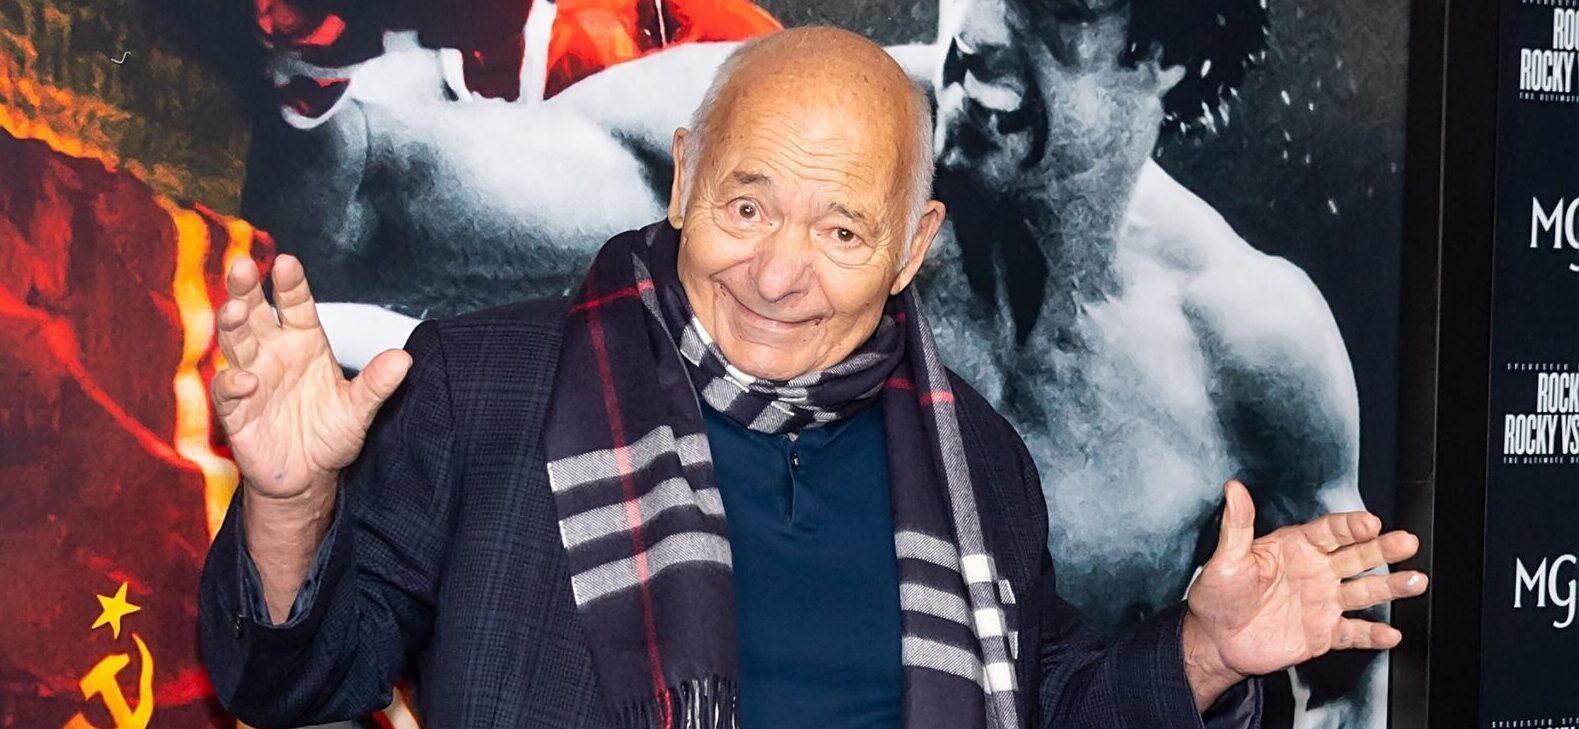 'Rocky' Burt Young Official Death Certificate: Cause Of Death Revealed